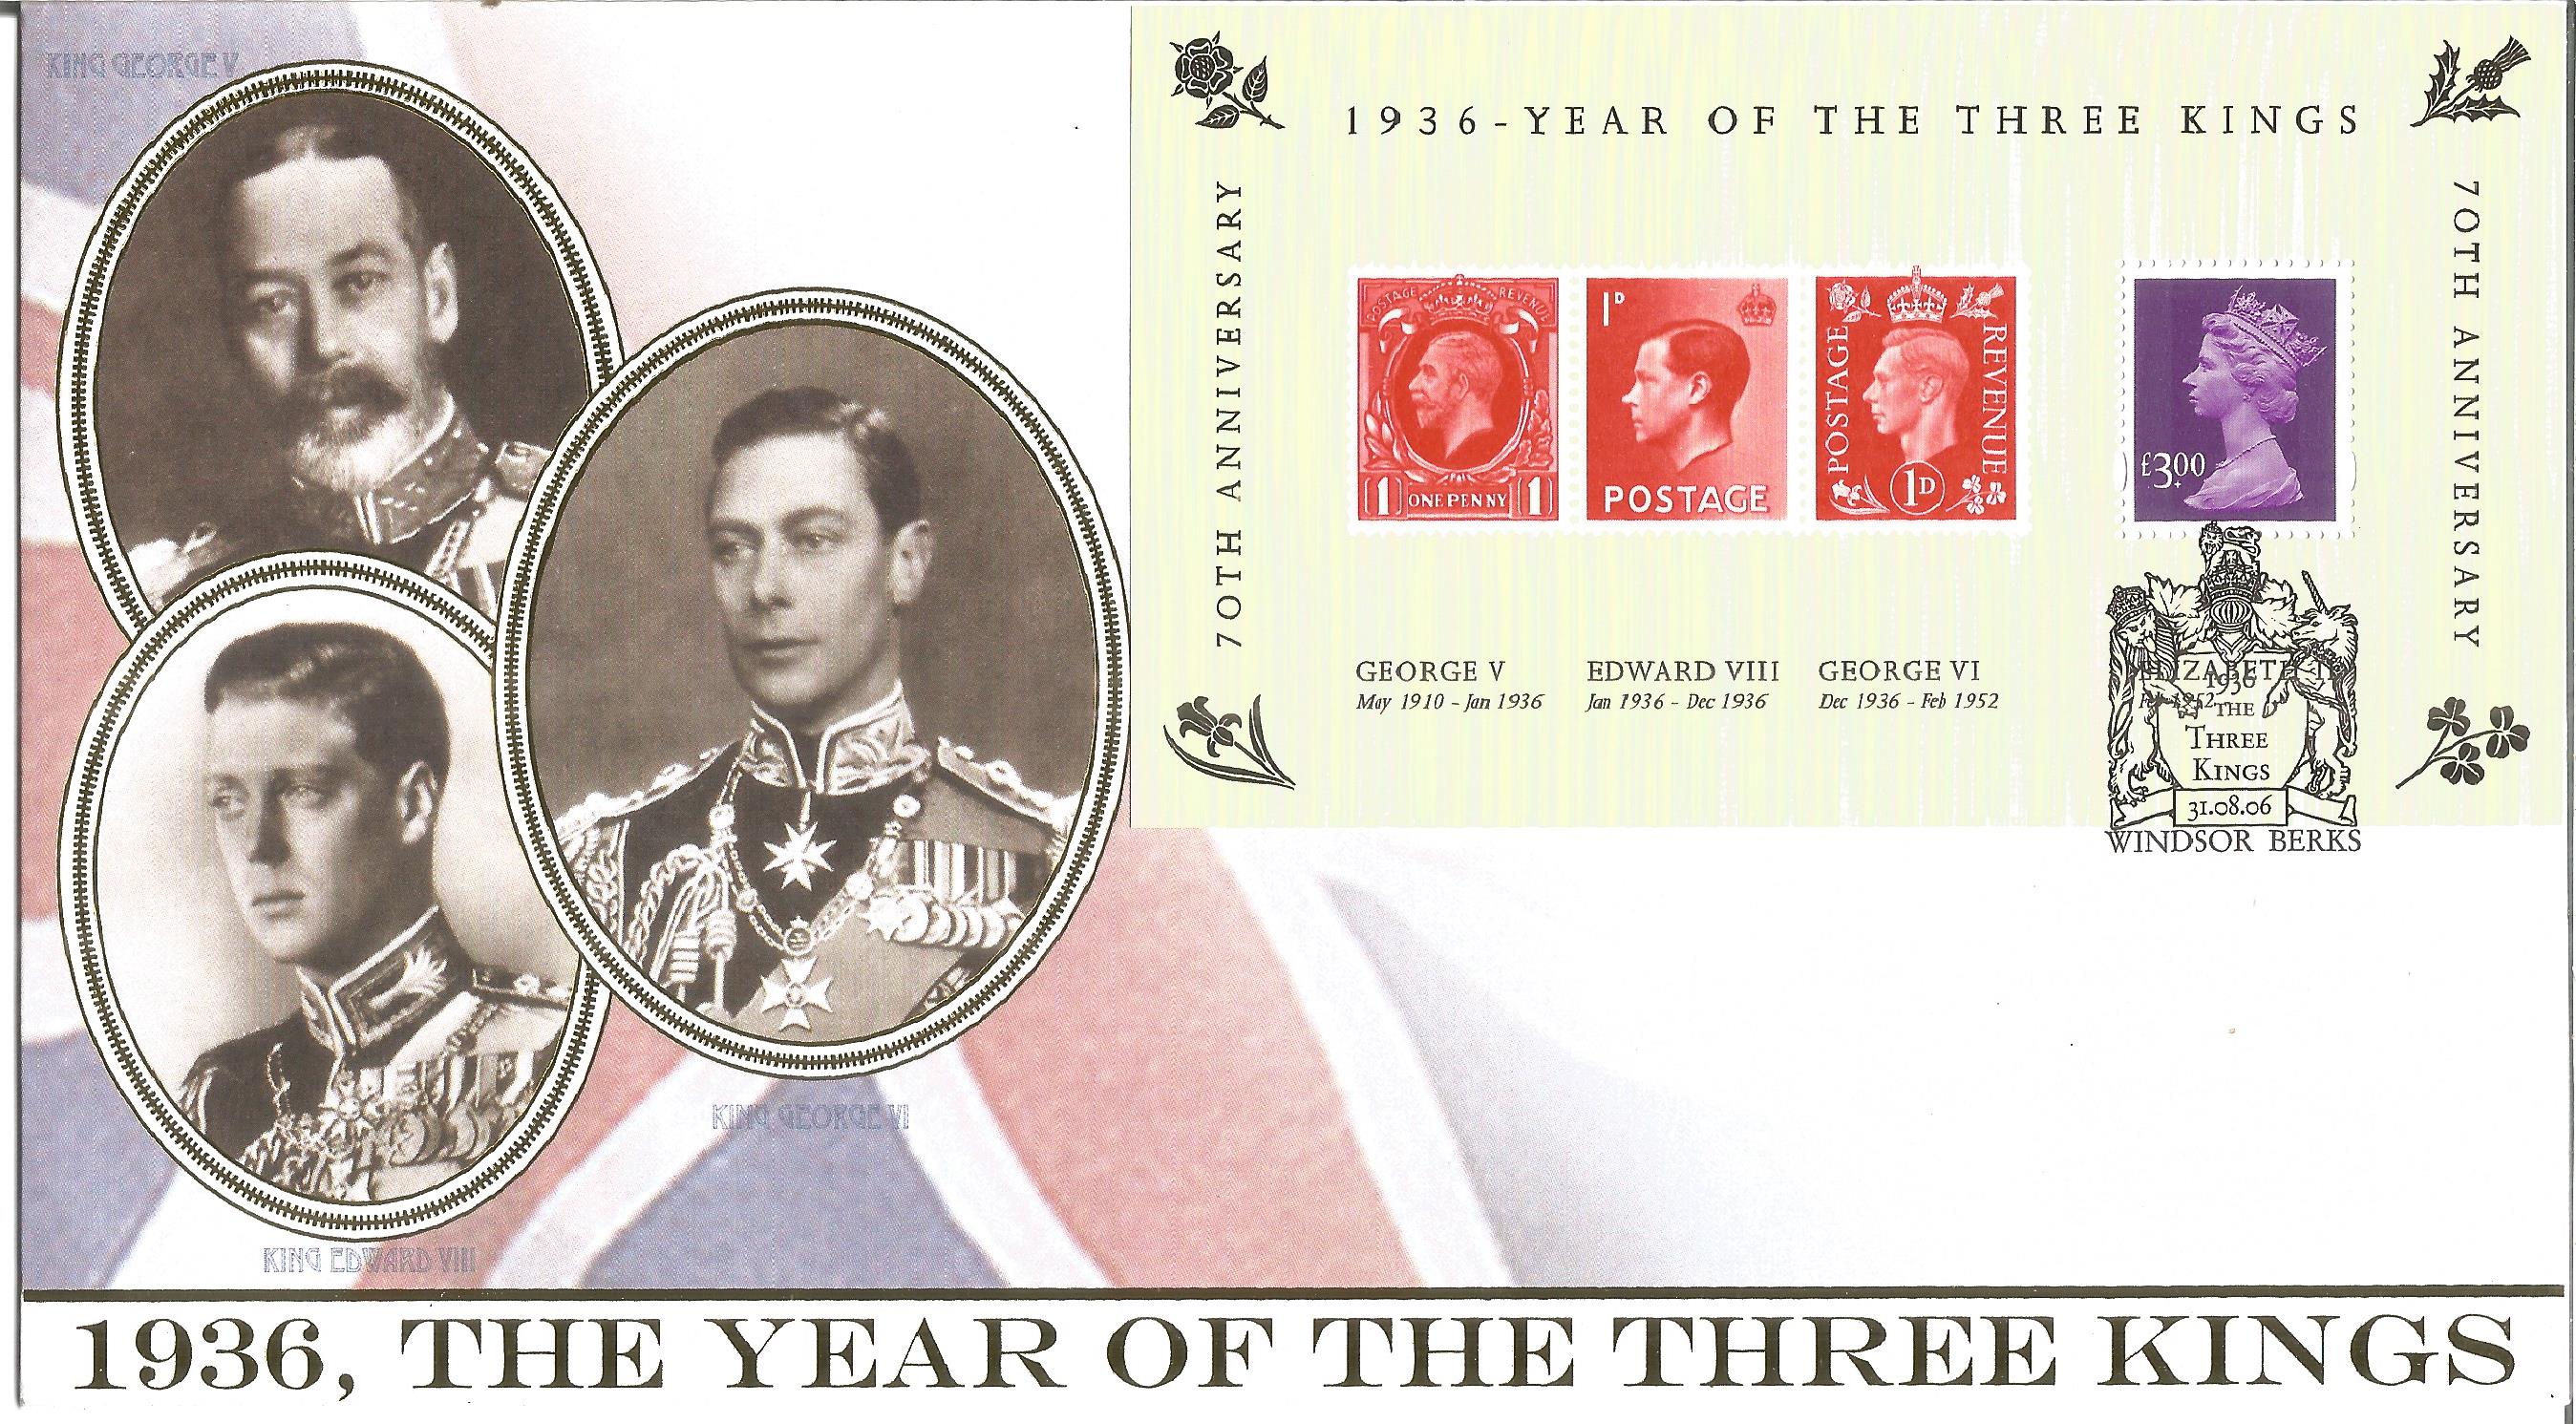 1936 The Year of the Three Kings unsigned Internetstamps official FDC series 2 cover No 41. Date